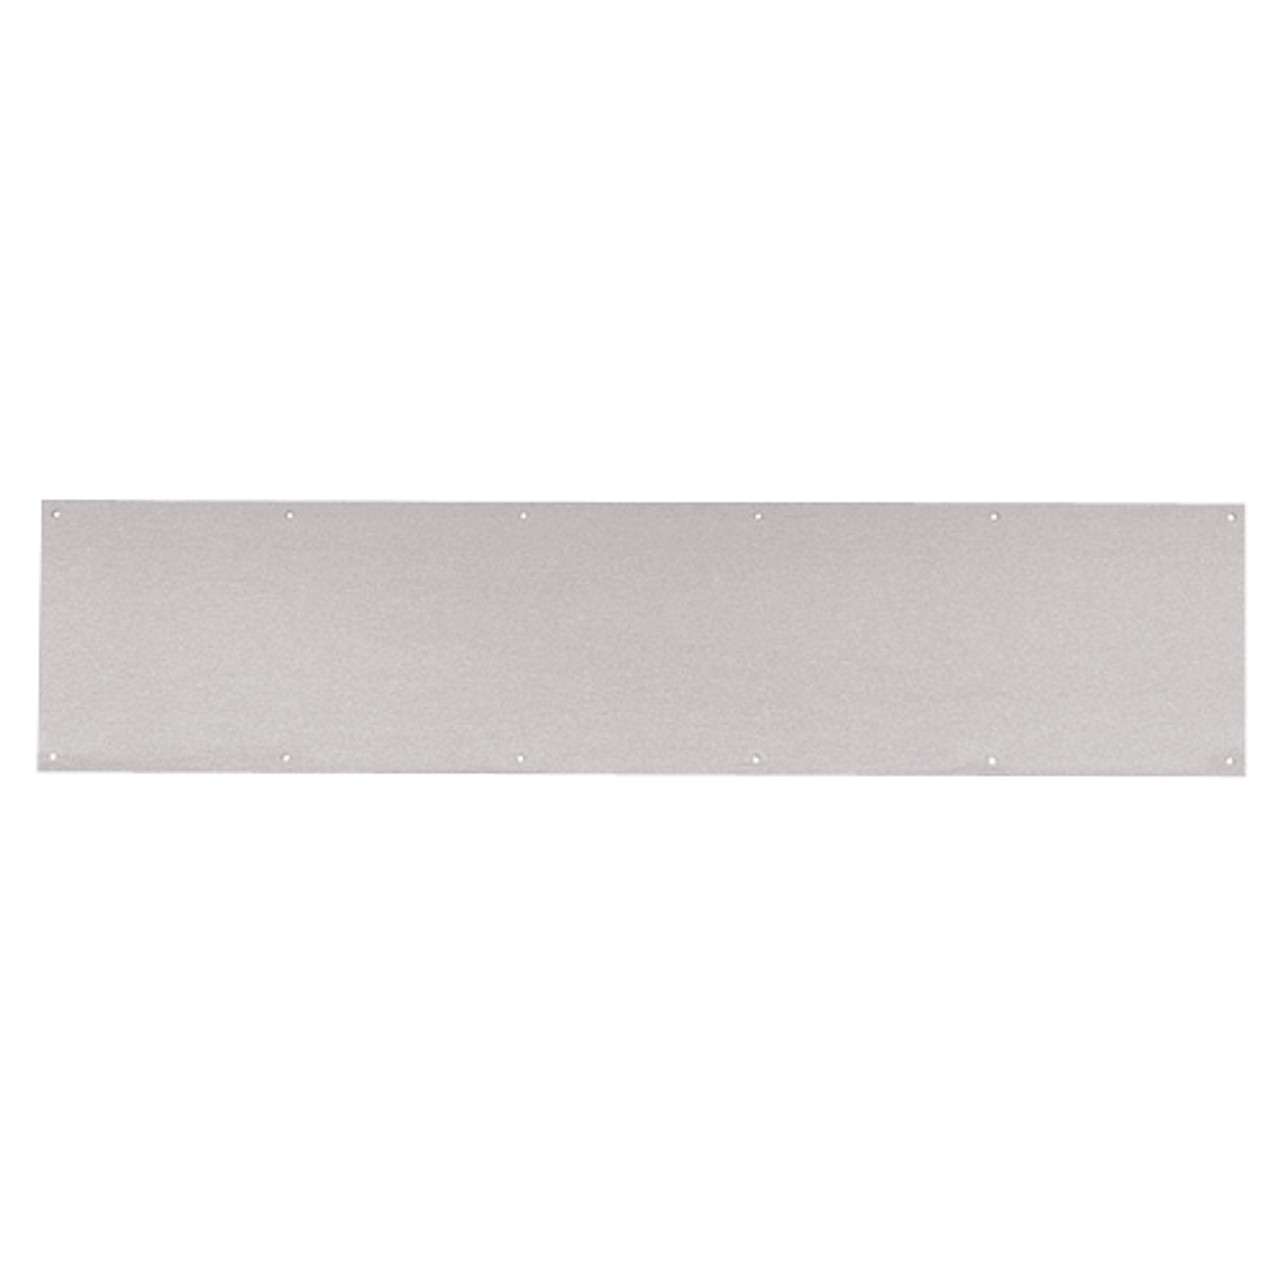 8400-US32D-40x16-B-CS Ives 8400 Series Protection Plate in Satin Stainless Steel